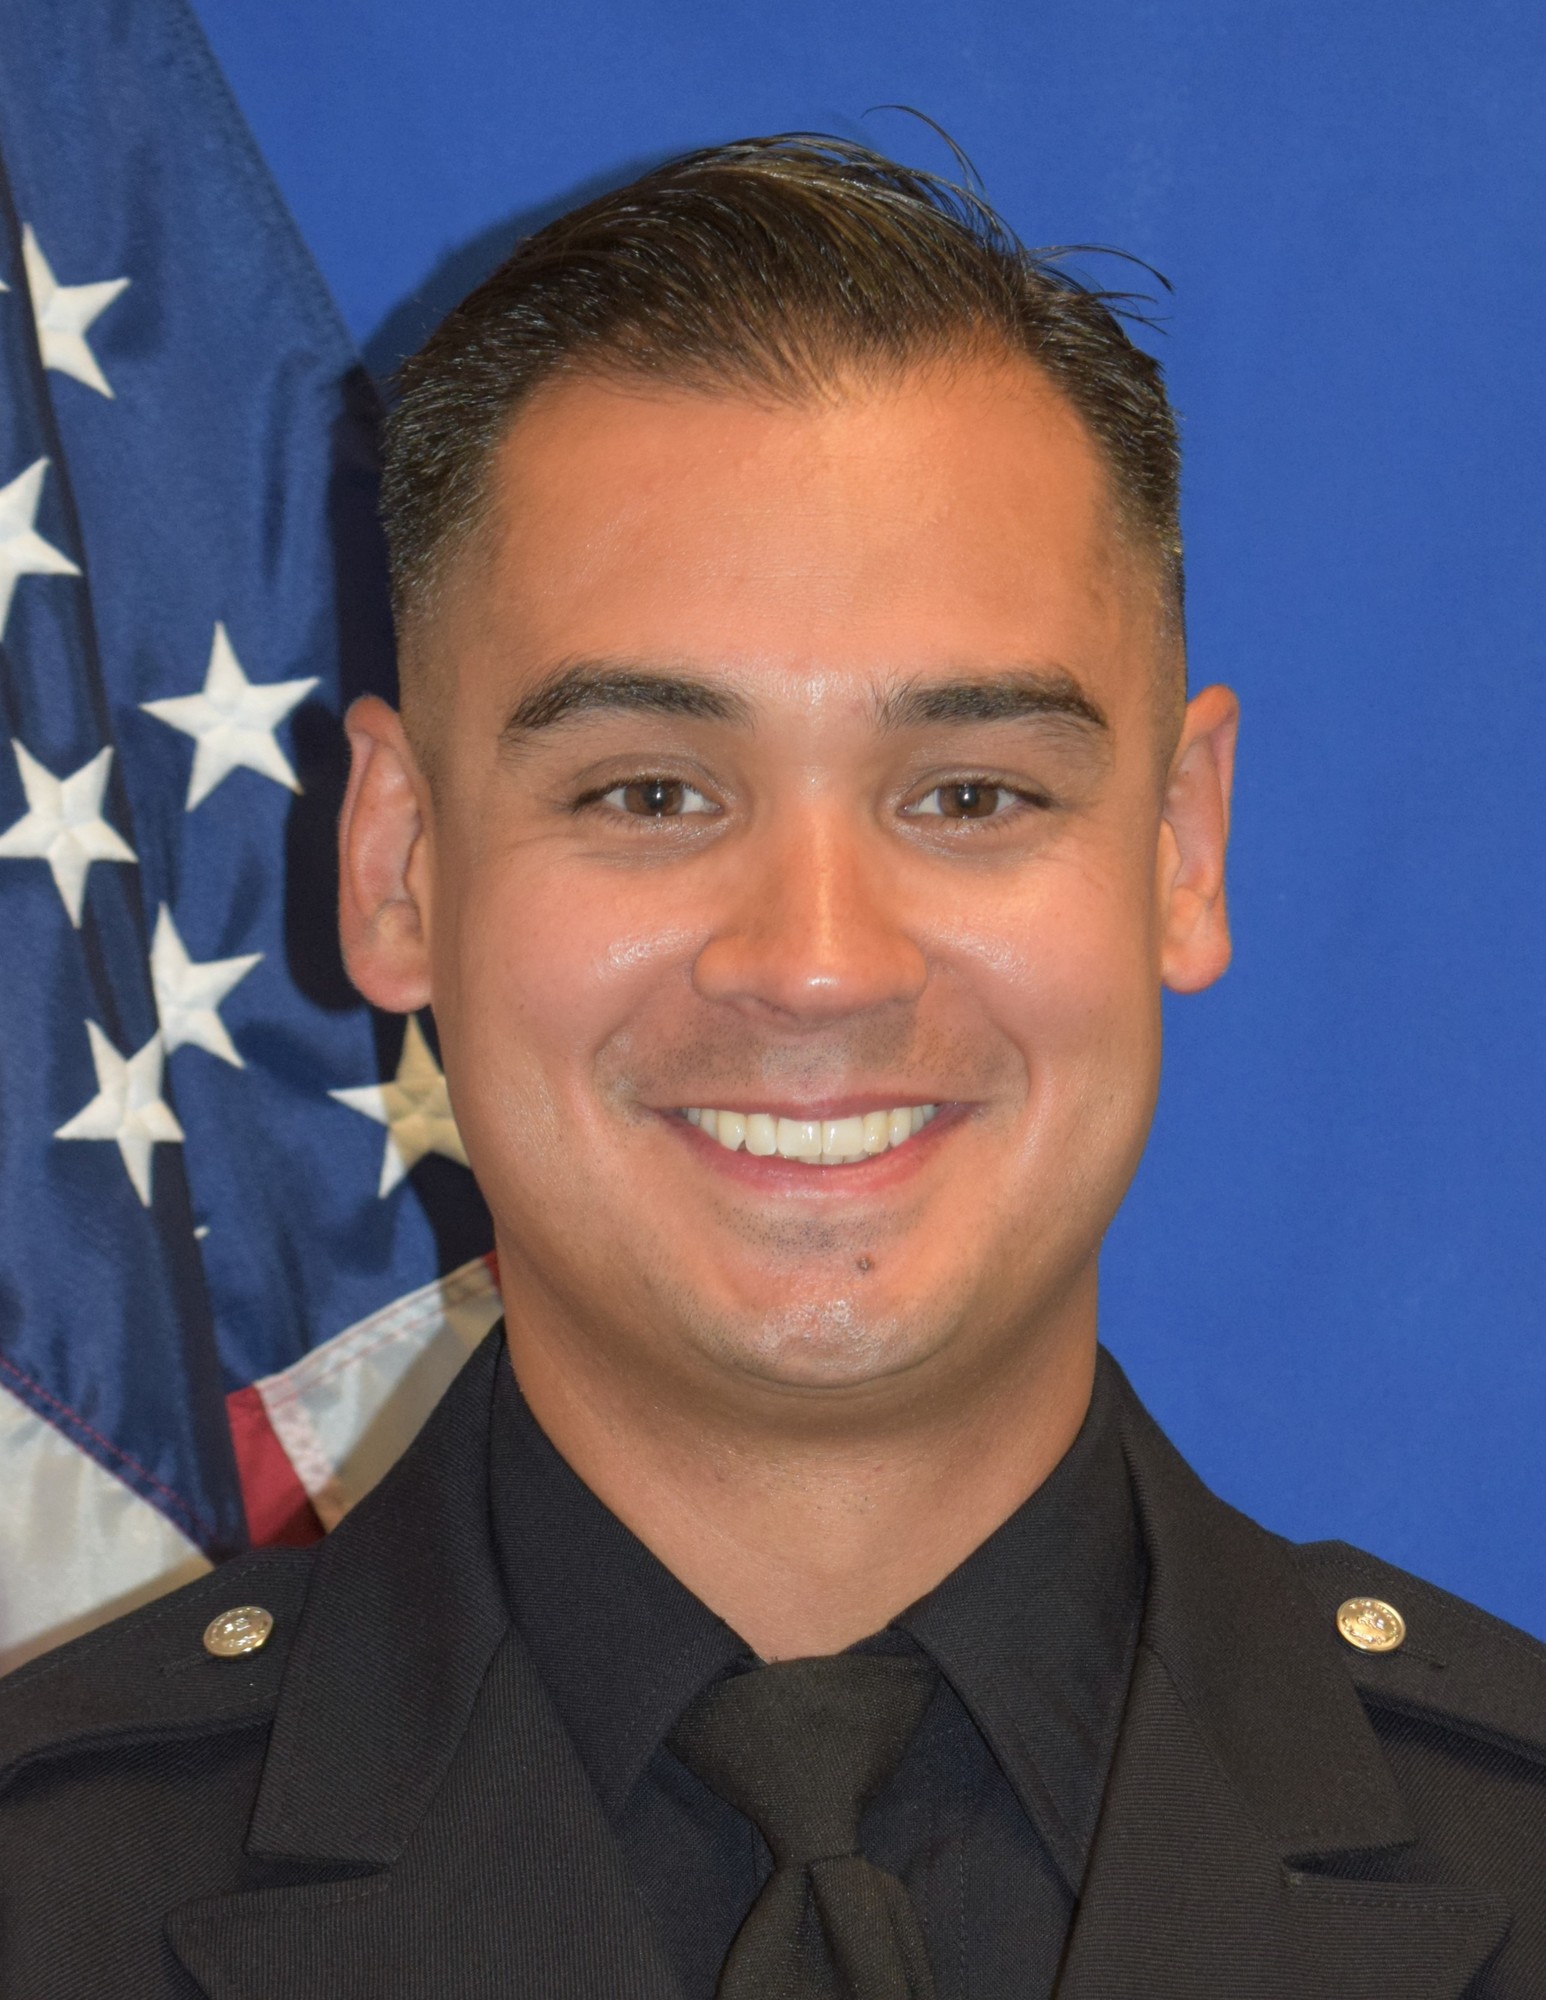 Officer Anthony Piol, 10 years